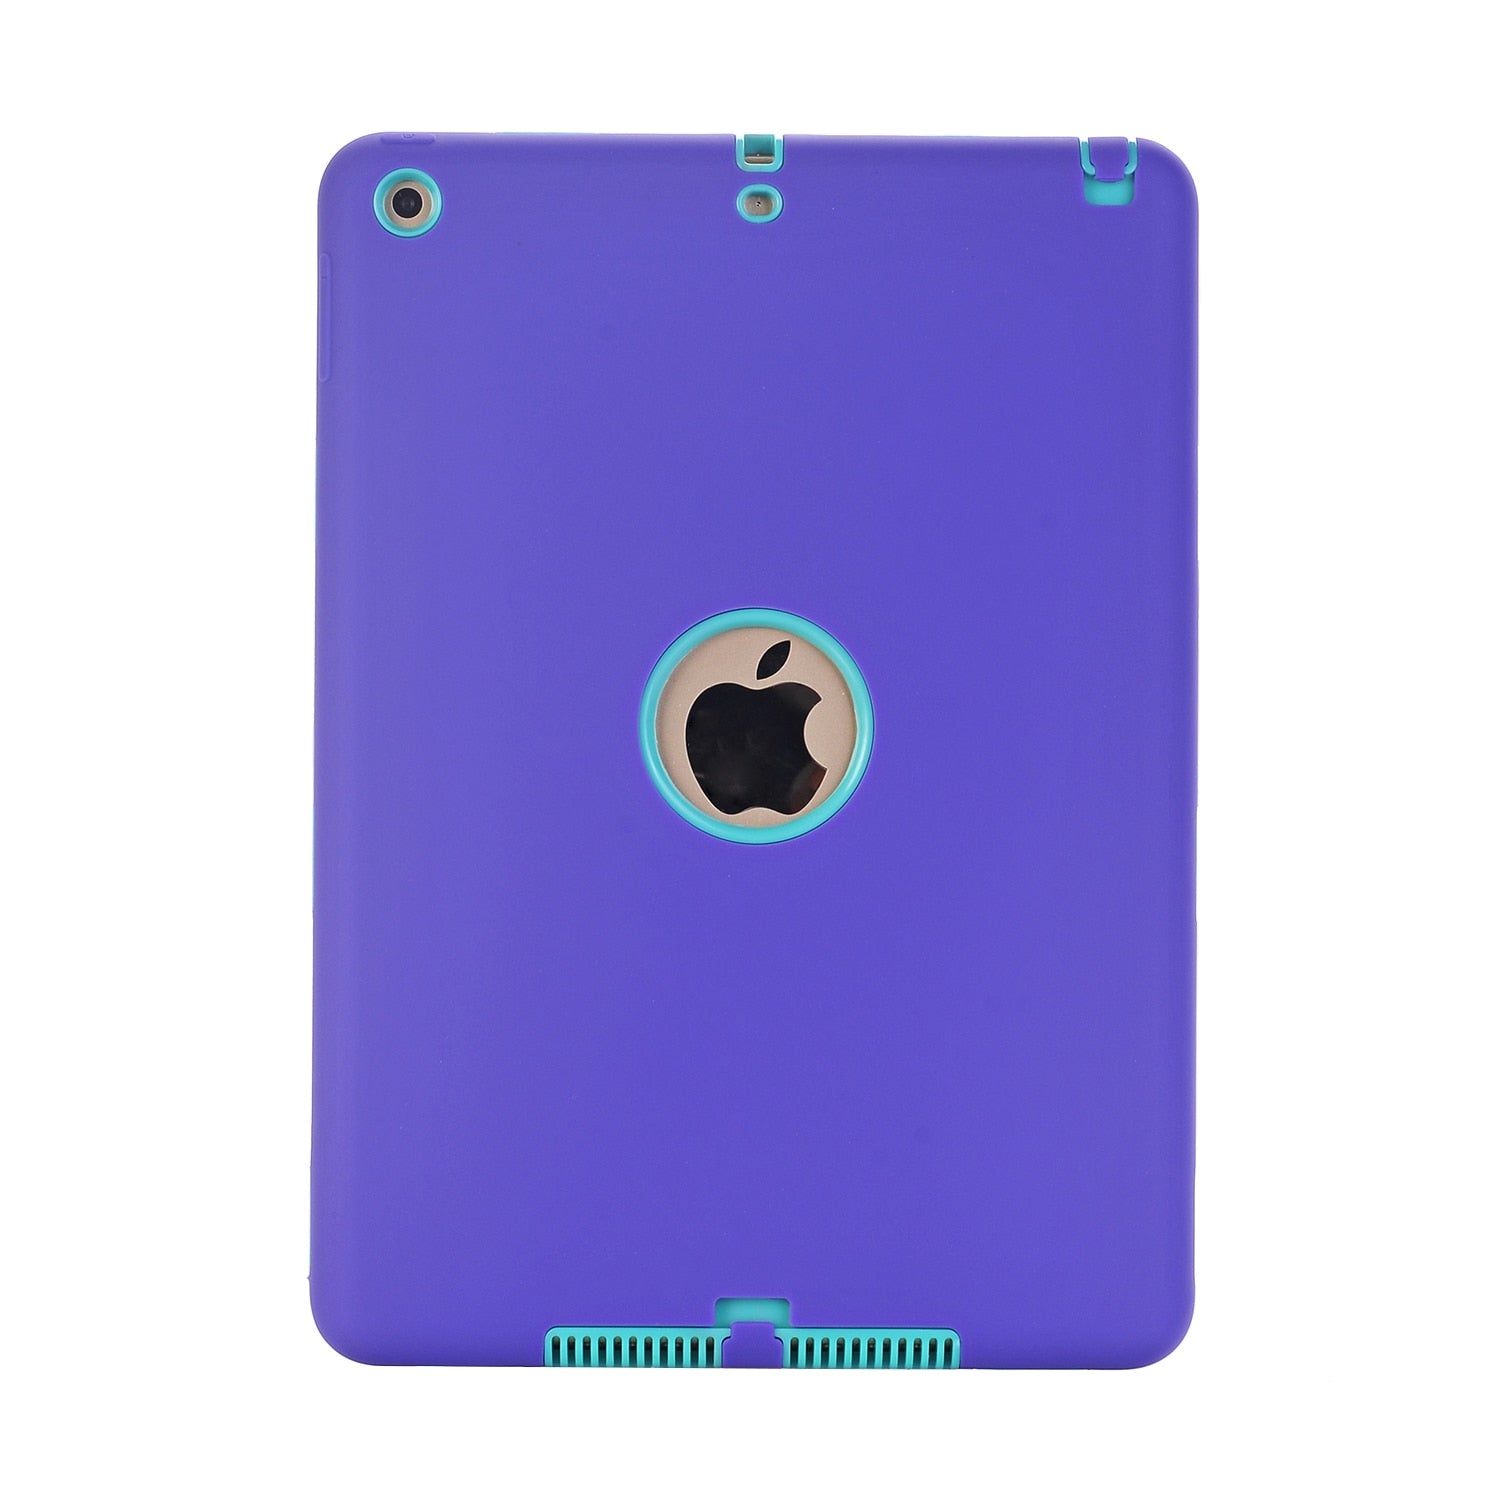 Cases For New iPad 9.7" 2017 (A1822/A1823),High-Impact Shockproof 3 Layers Soft Rubber Silicone+Hard PC Protective Cover Shell - 200001091 Purple Mint / United States Find Epic Store